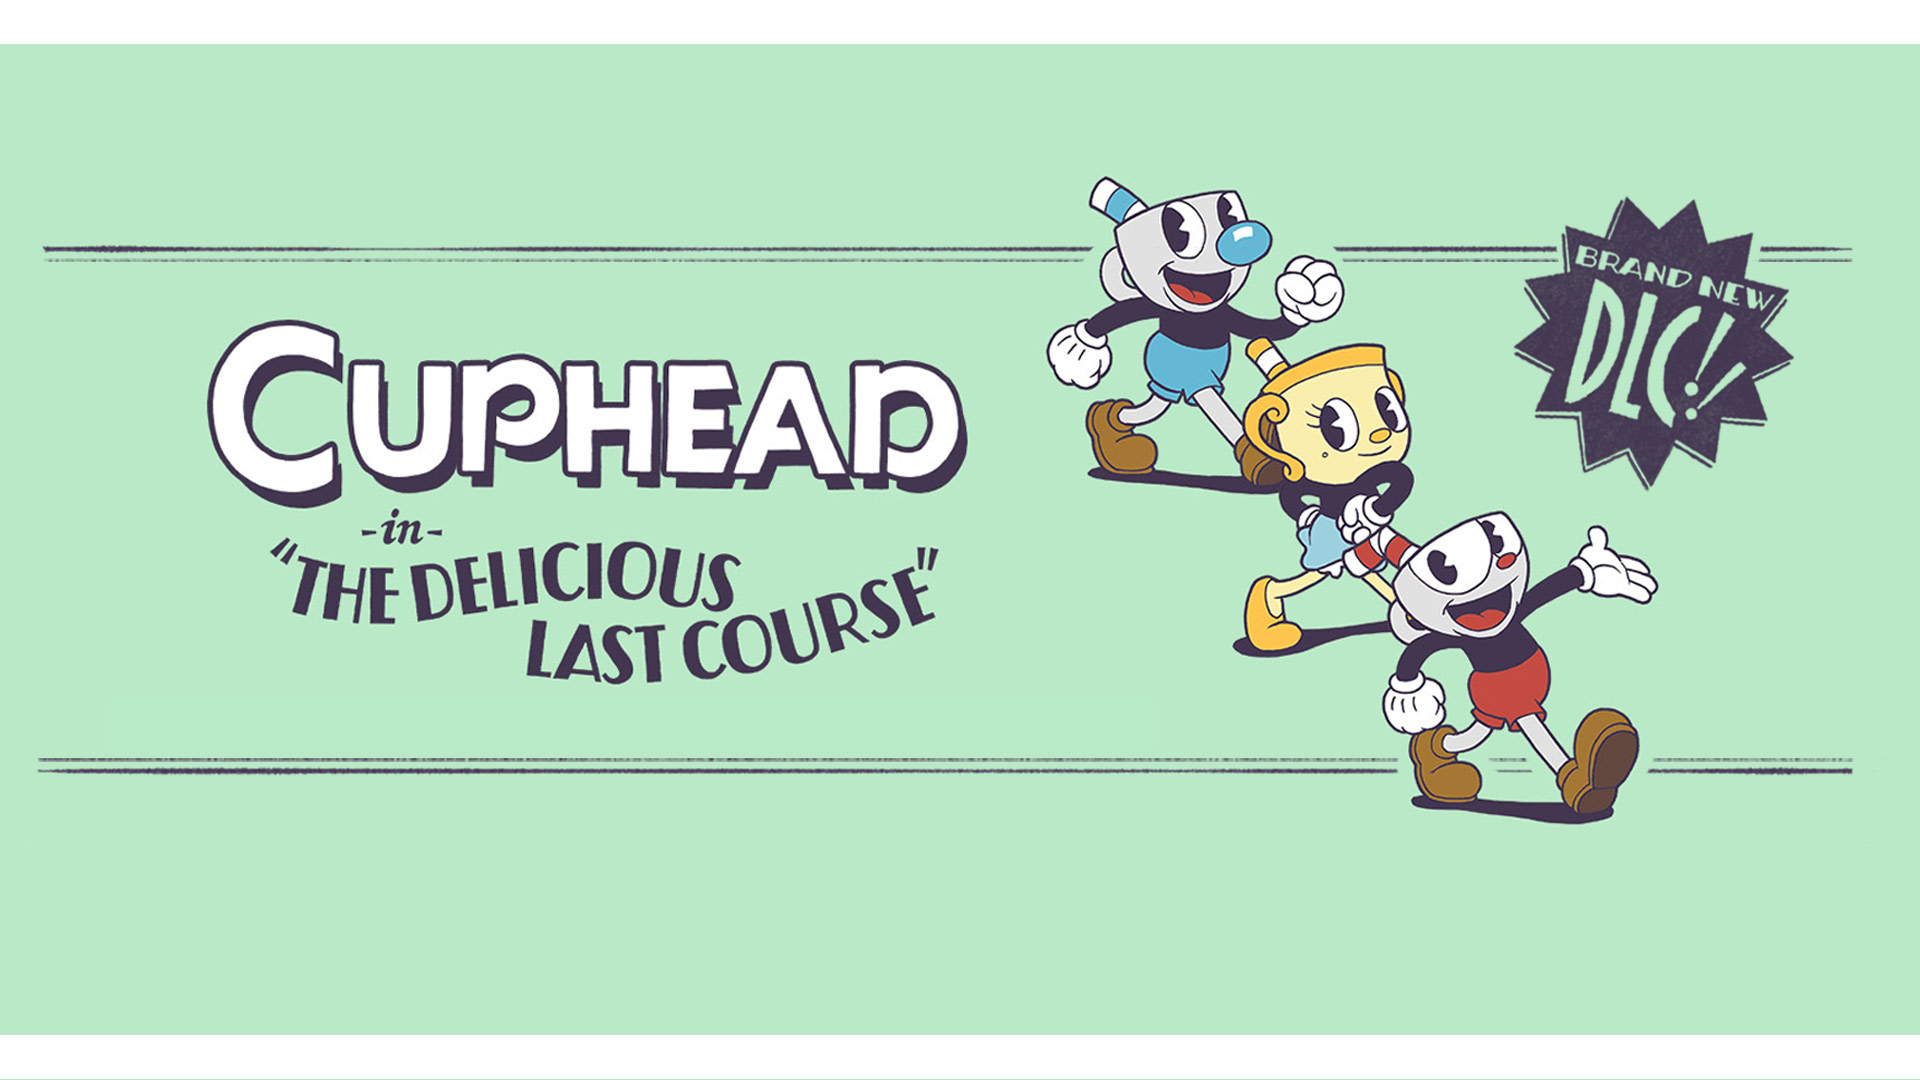 Cuphead in The Delicious Last Course, Brandneuer DLC!, 3 Cuphead-Charaktere posieren